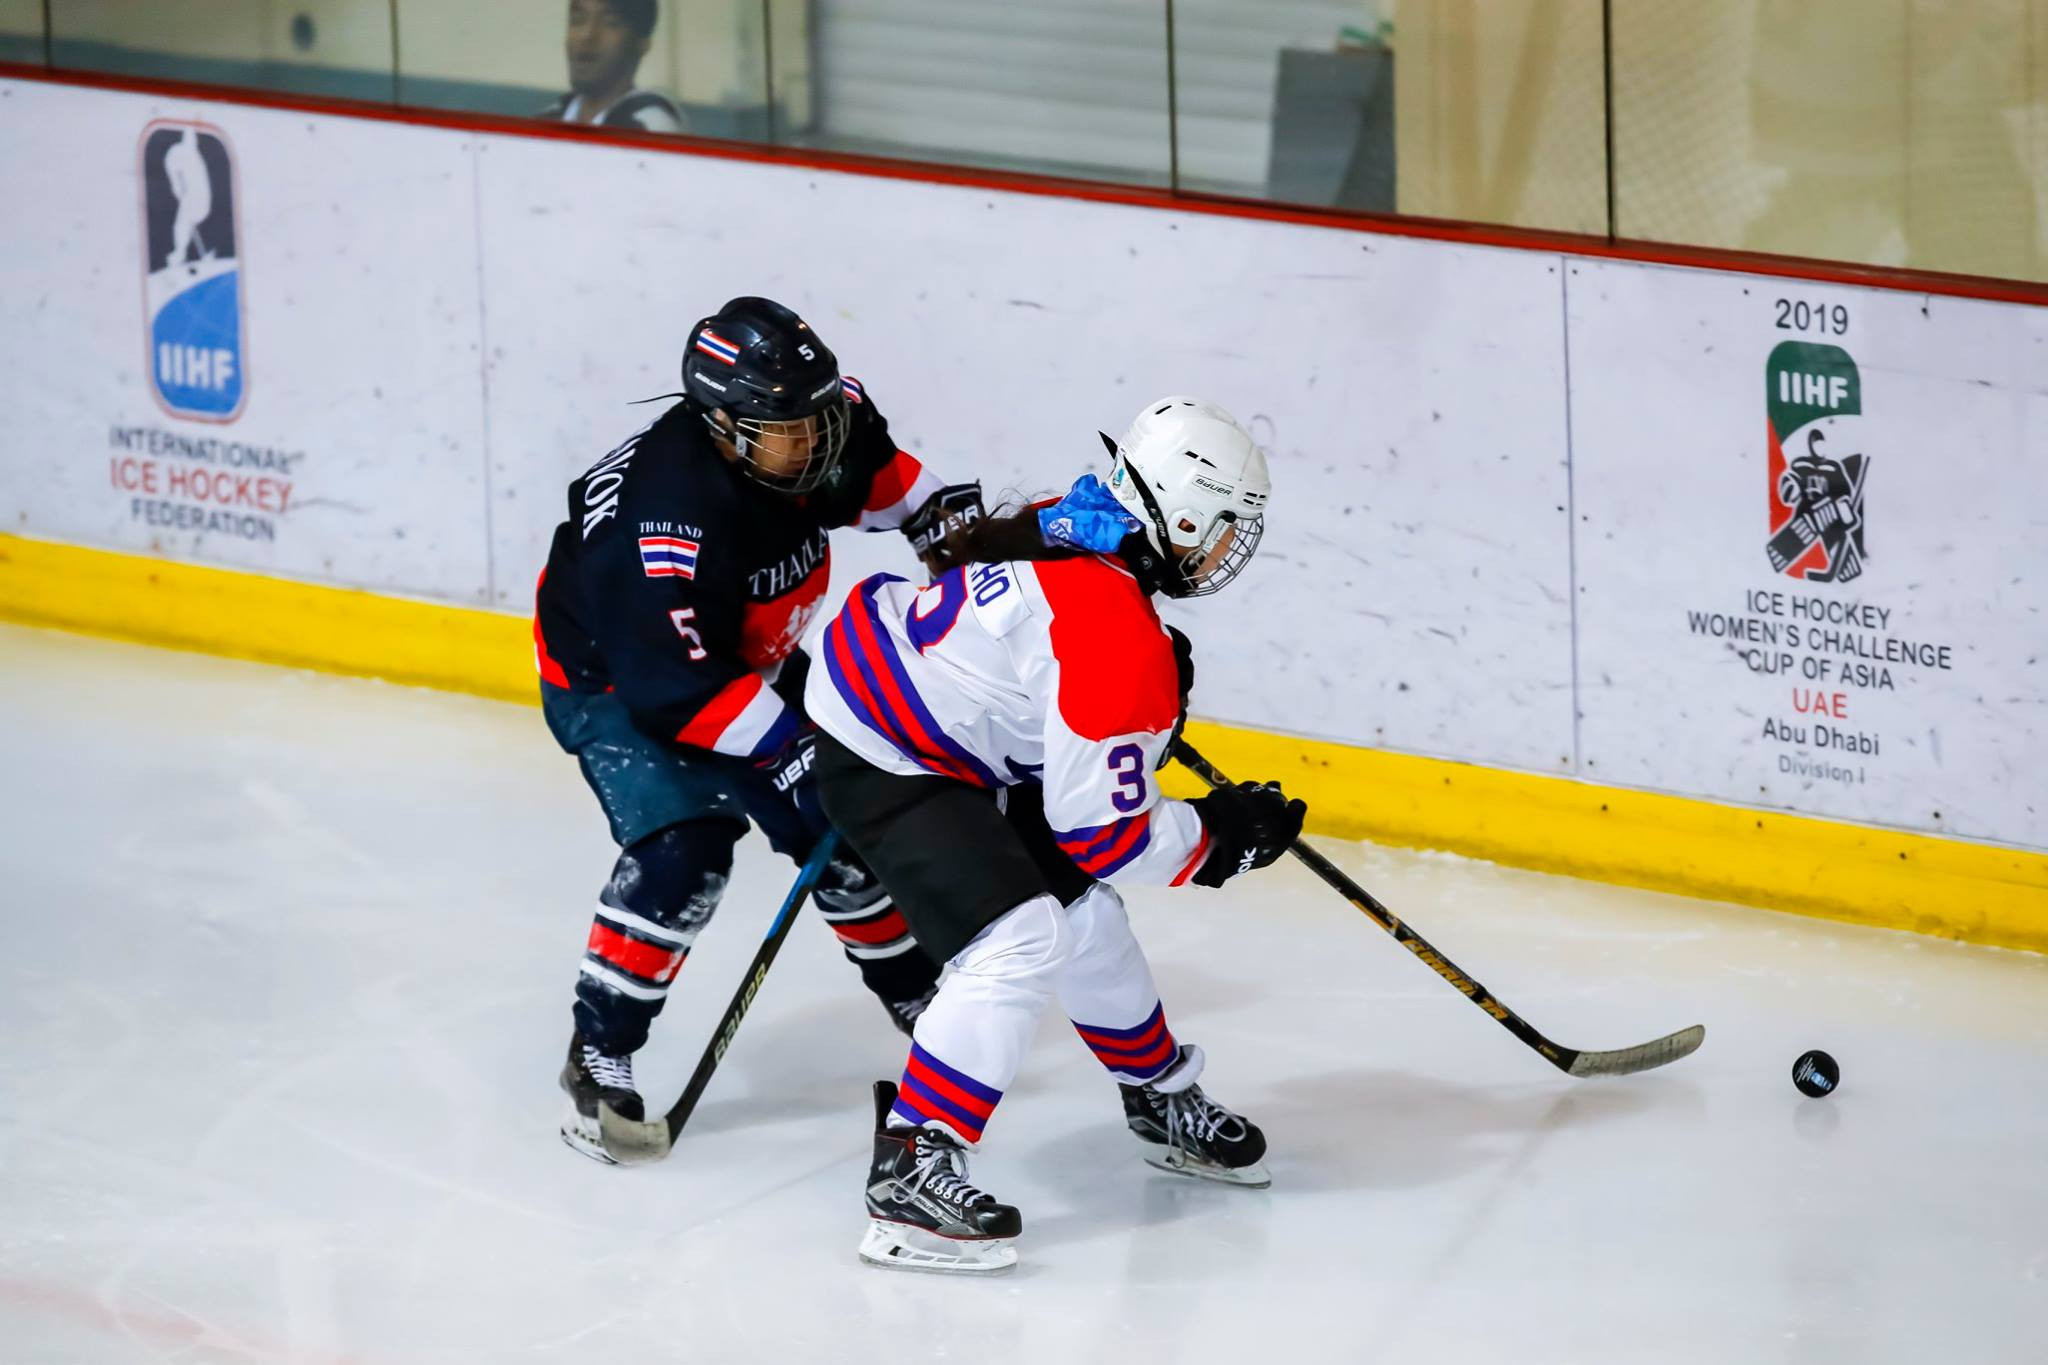 Thailand thrash Singapore to top IIHF Women's Challenge Cup of Asia standings